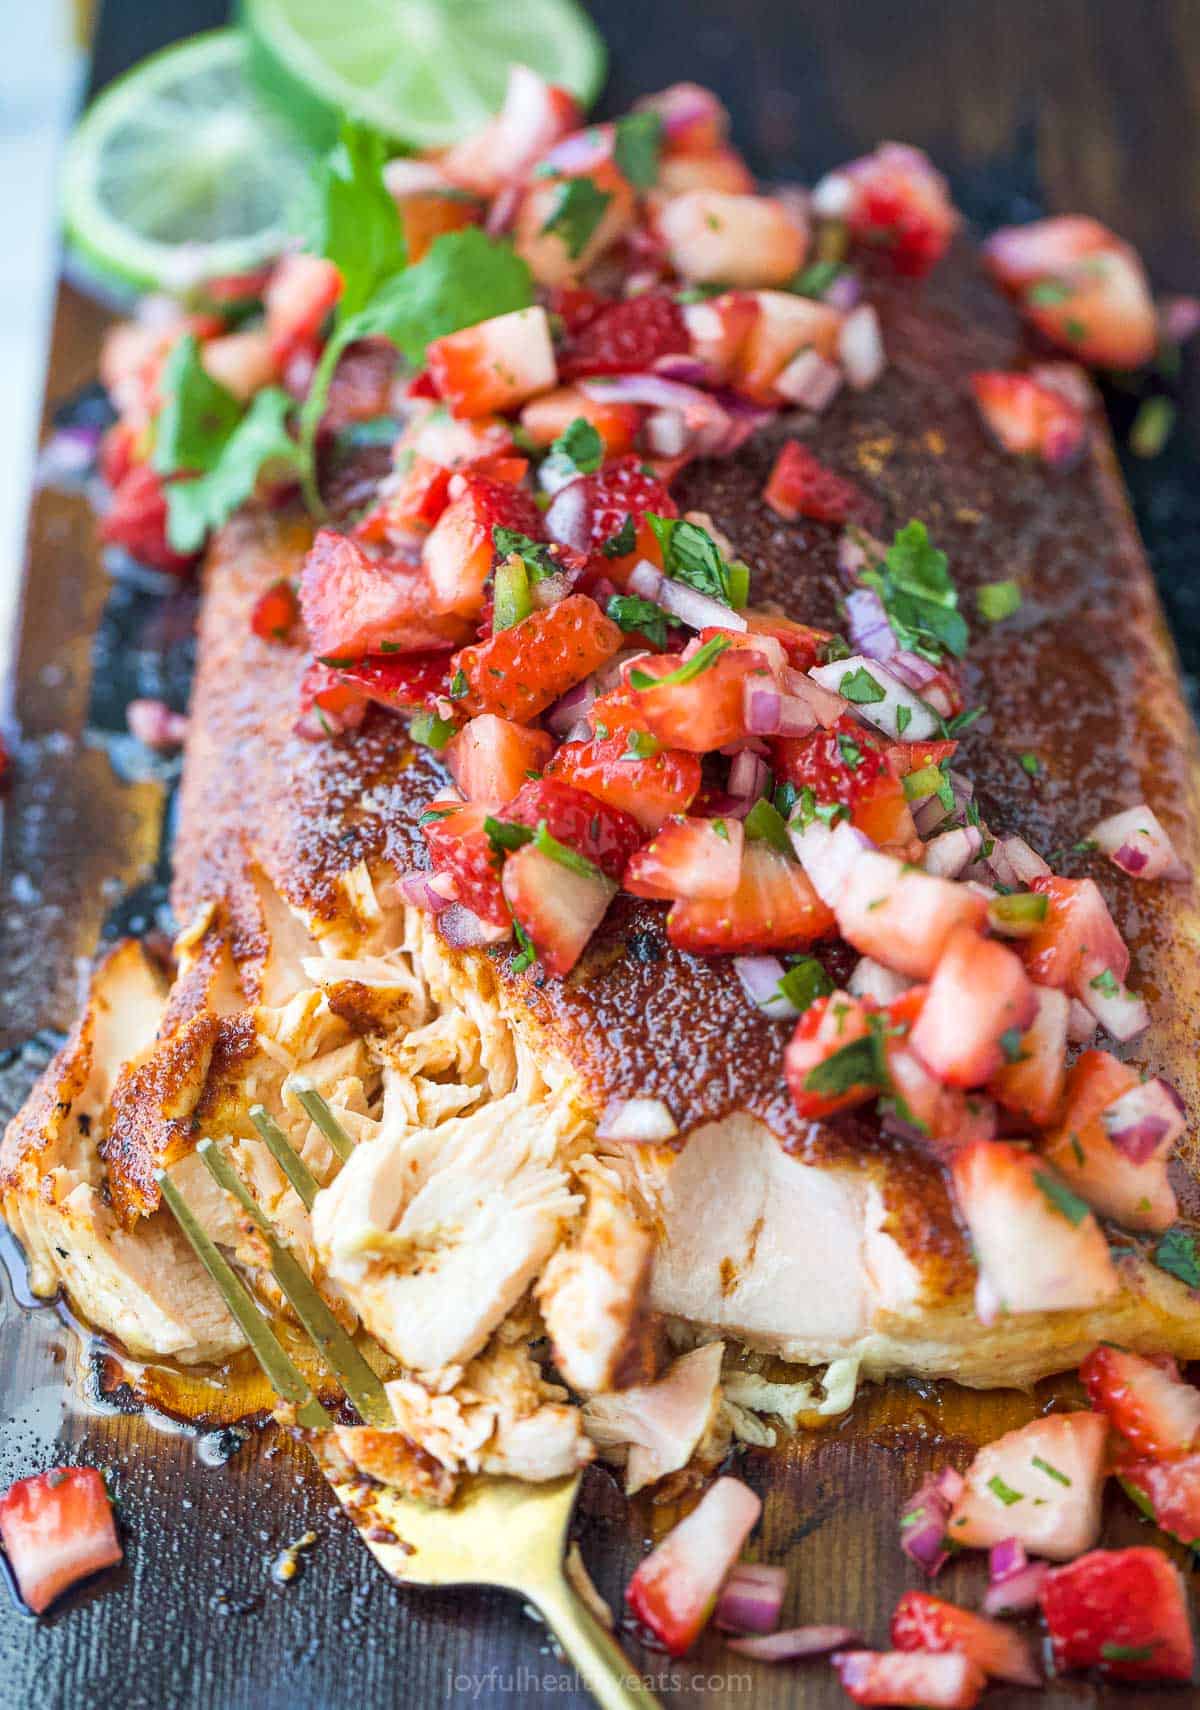 Flaked salmon with salsa on top.